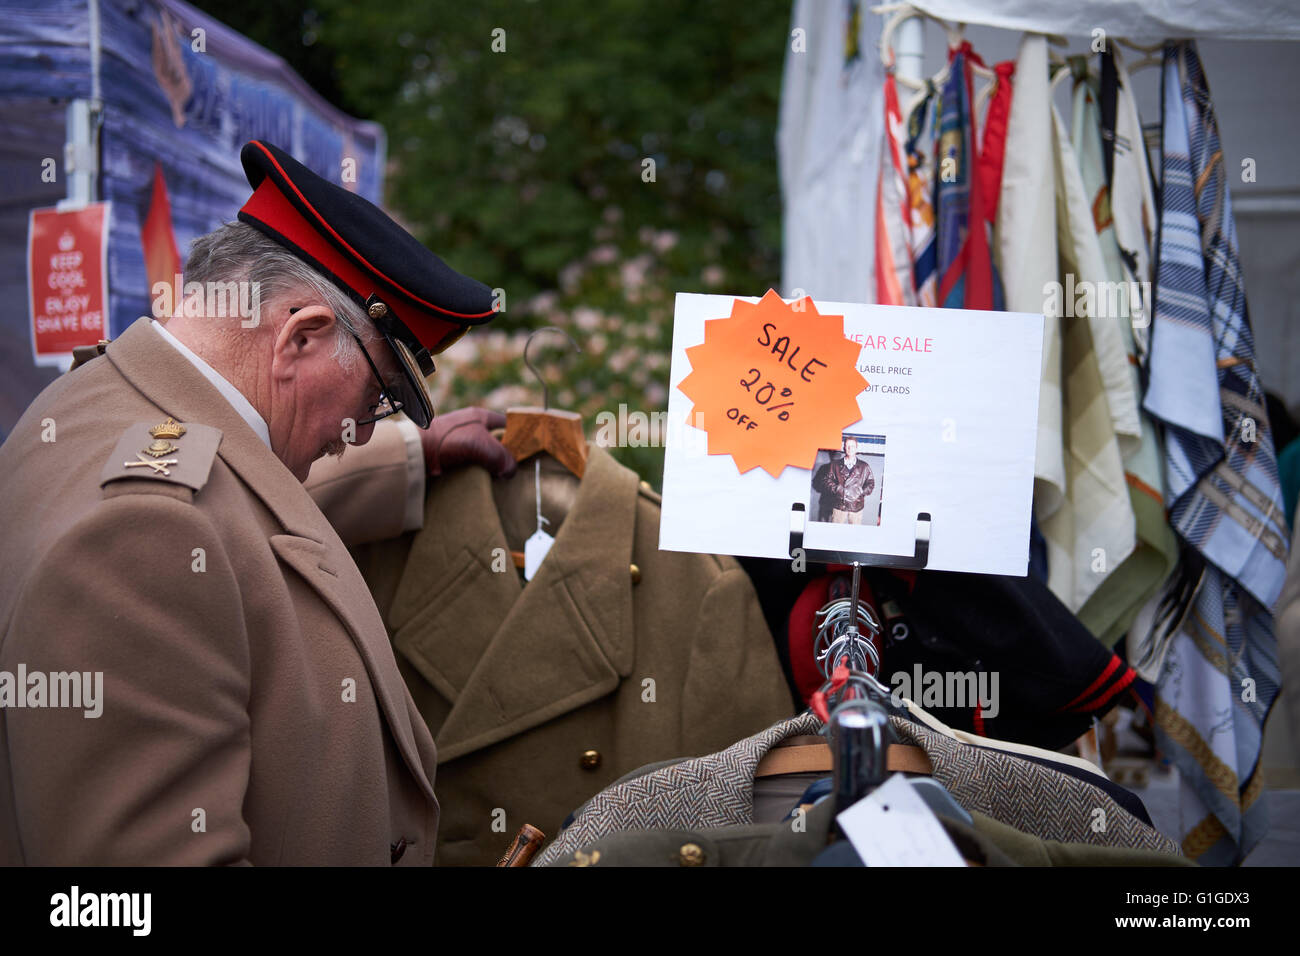 A man dressed in military uniform looks through a sale rack in an outdoor vintage store. Stock Photo